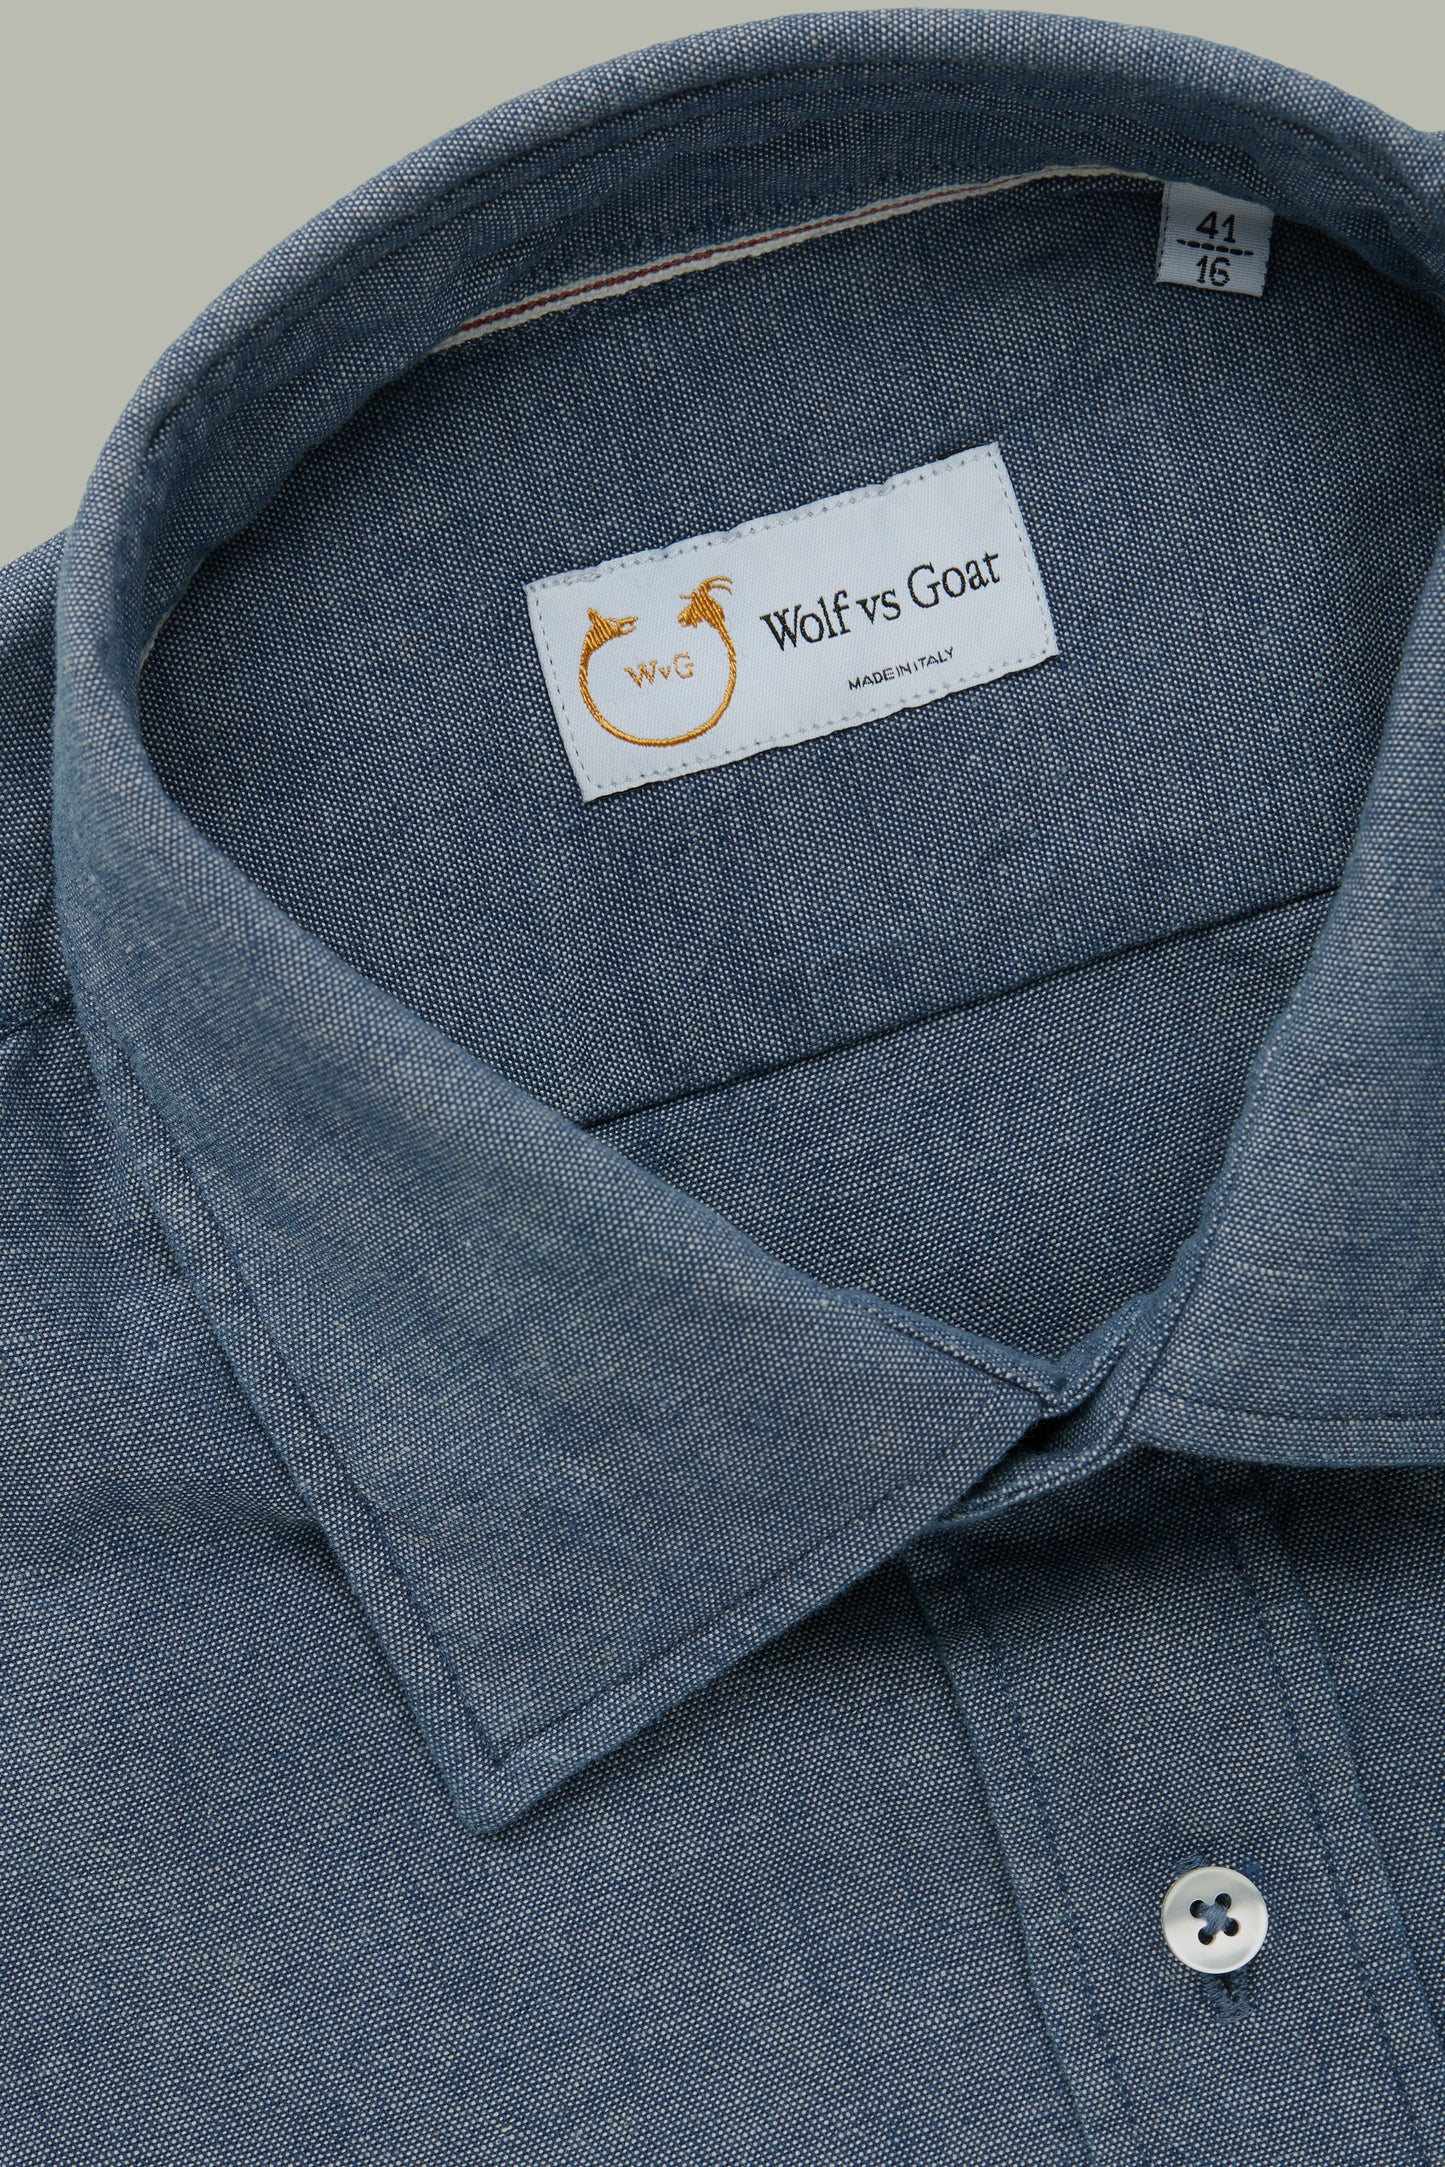 Selvage Chambray Button Up Regular Fit